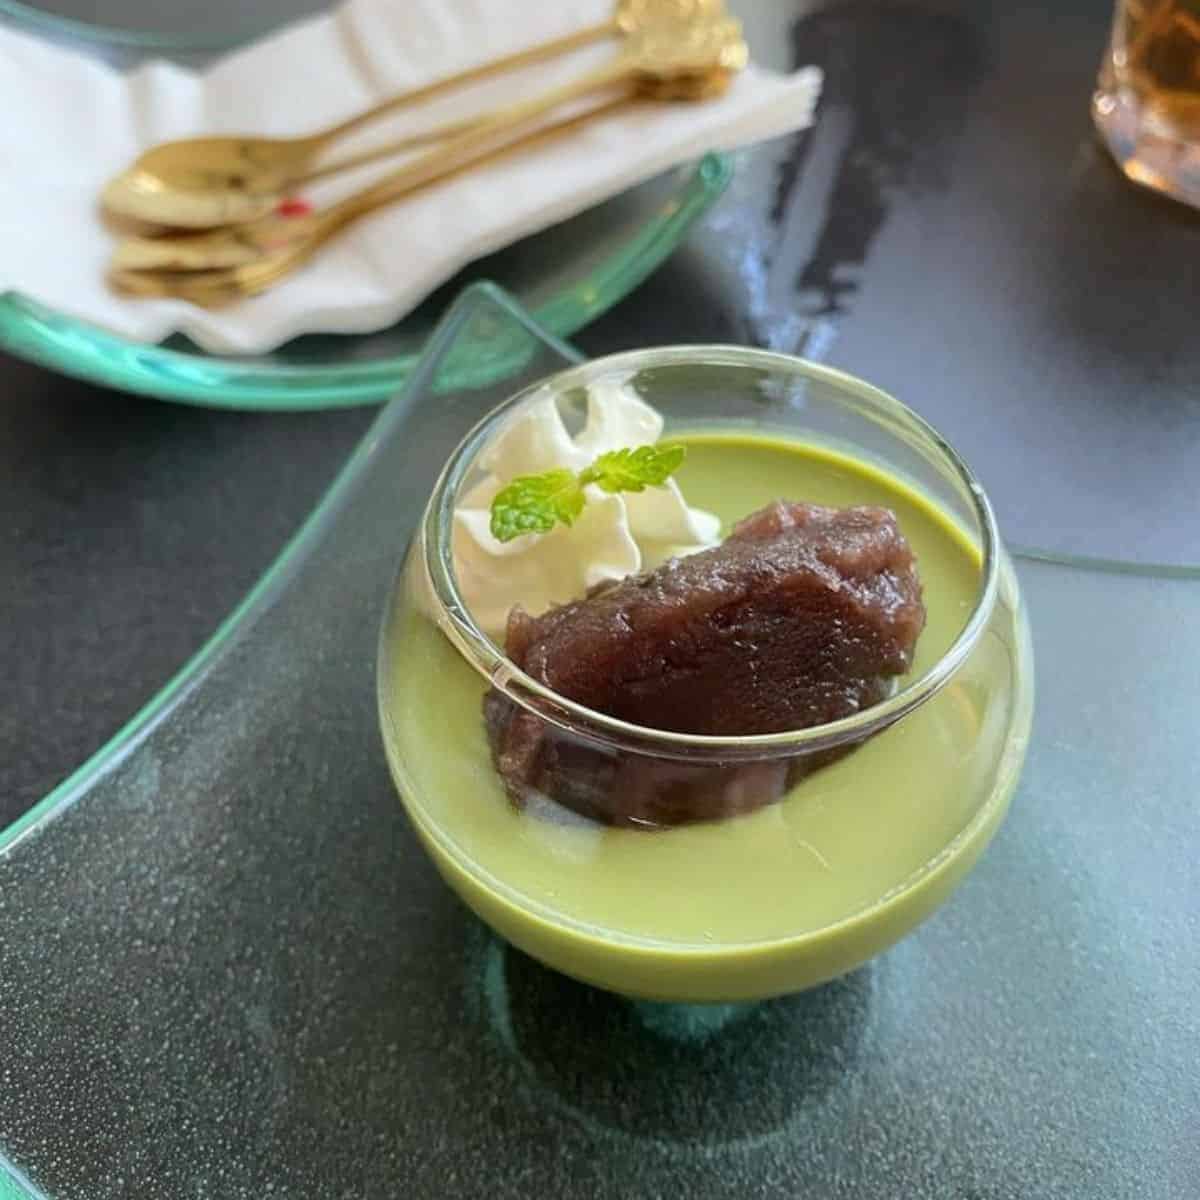  A delicious serving of Matcha Pudding with red bean paste and whipped cream in a transparent glass